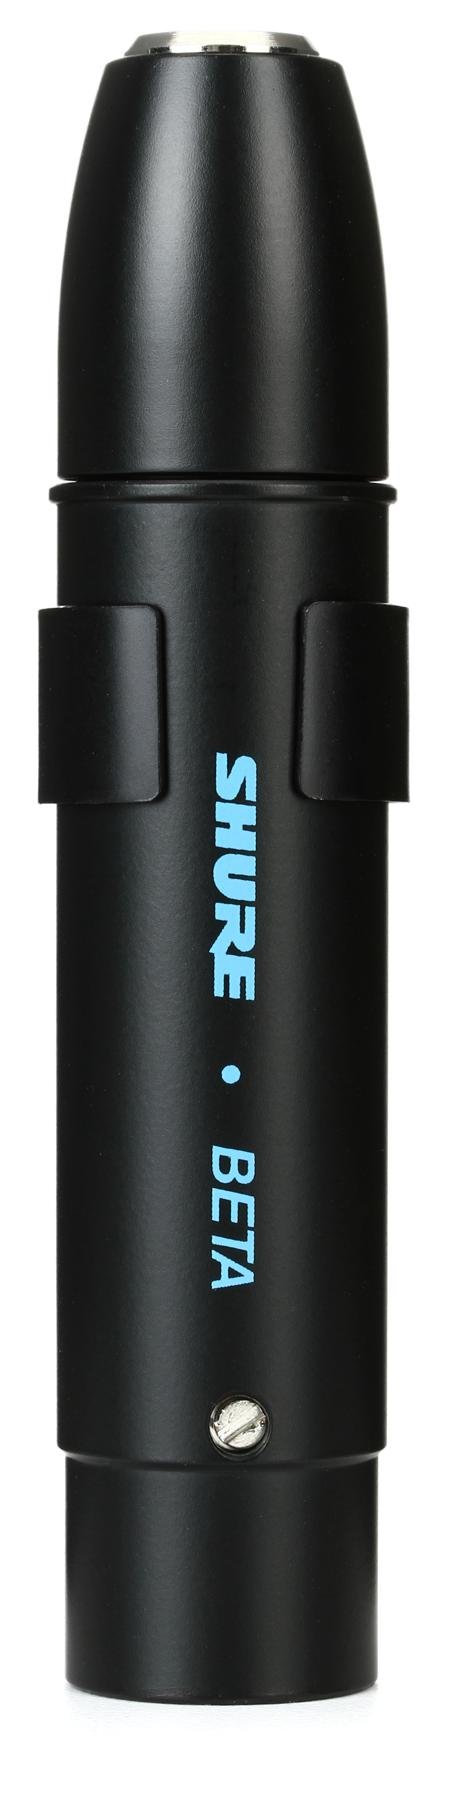 Shure RPM626 In-Line Preamp for Shure BETA Series | Sweetwater